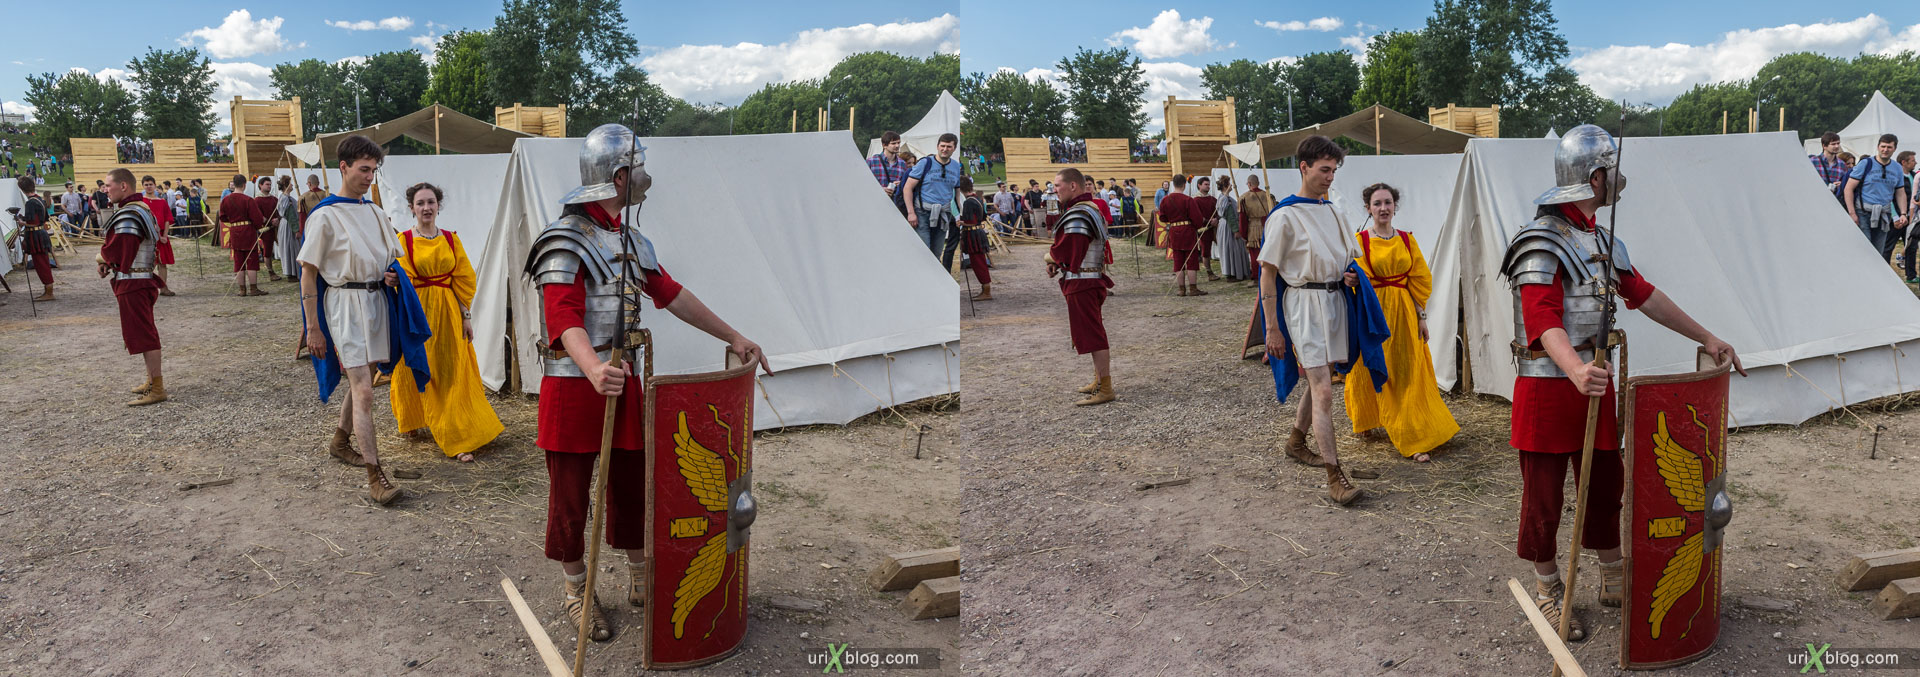 Times and Epochs, festival, Kolomenskoye park, Moscow, Russia, 3D, stereo pair, cross-eyed, crossview, cross view stereo pair, stereoscopic, 2015